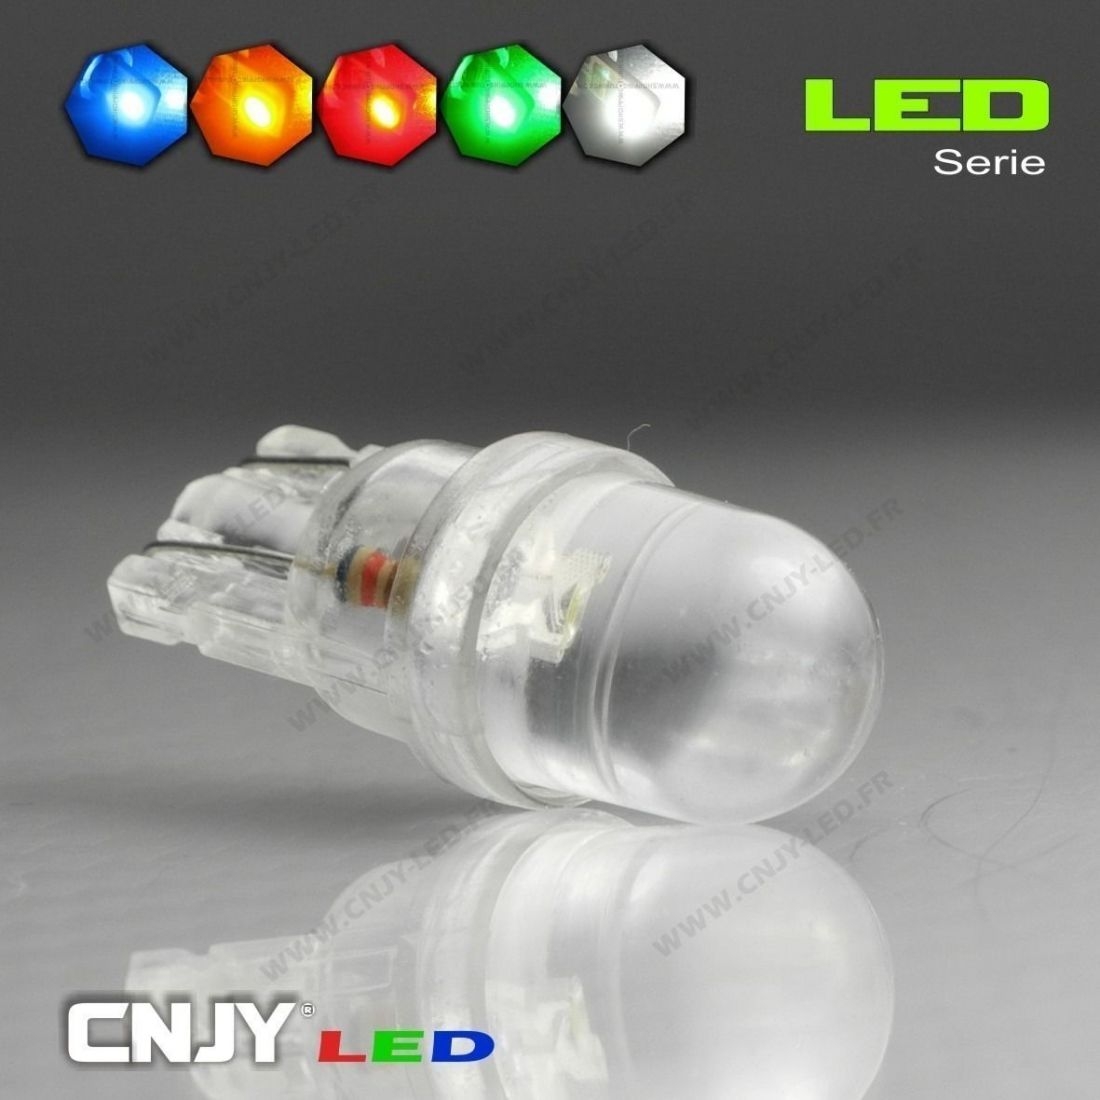 https://www.cnjy-led.fr/124-thickbox_default/ampoule-led-t10-w5w-ronde-convexe-tiger-auto-moto-12v.jpg